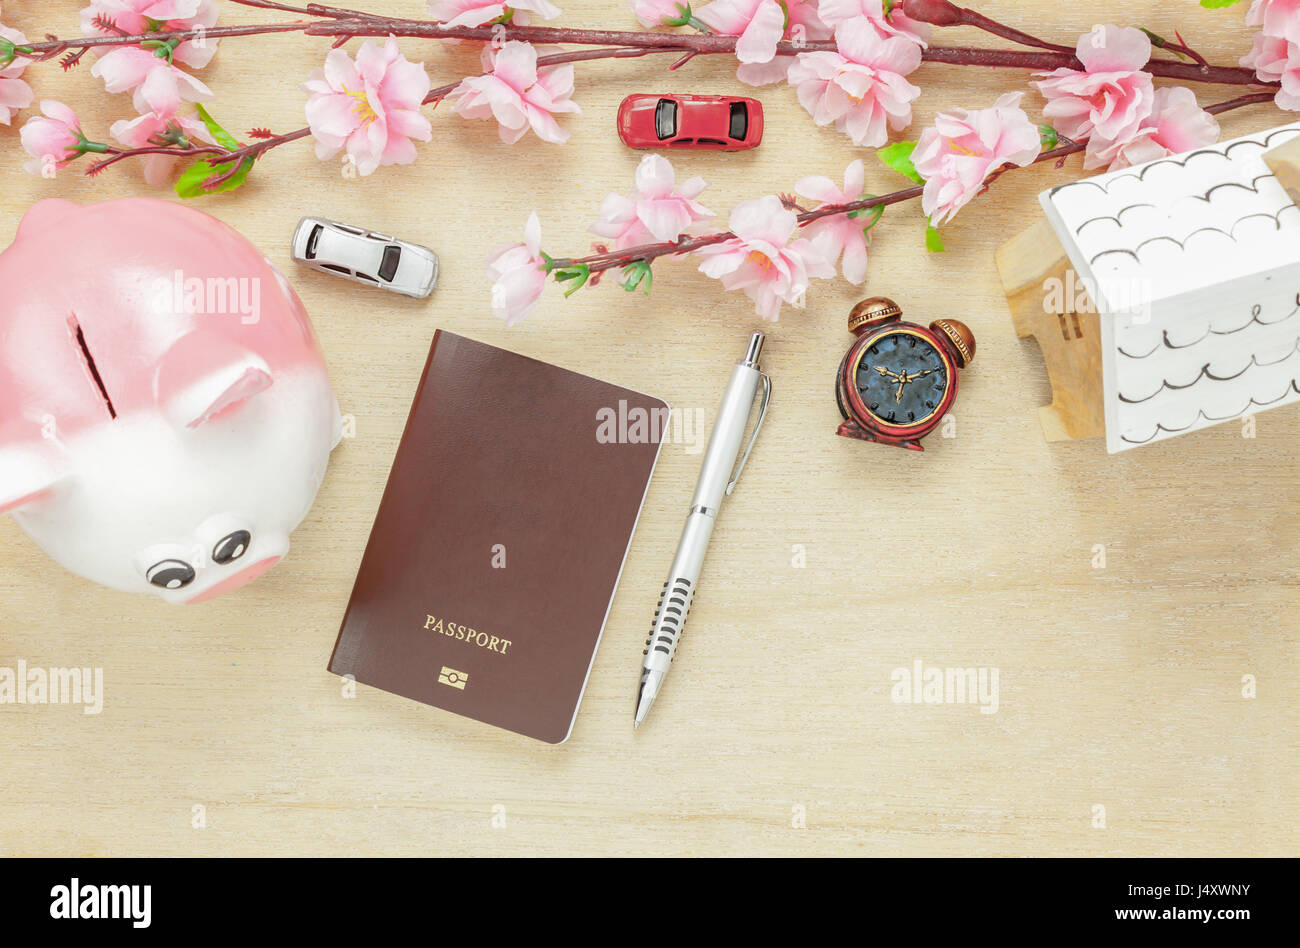 Top view business office desk concept. Saving money to travel with passport.Wood house  also car and clock on wooden shelf.The beautiful pink flower w Stock Photo